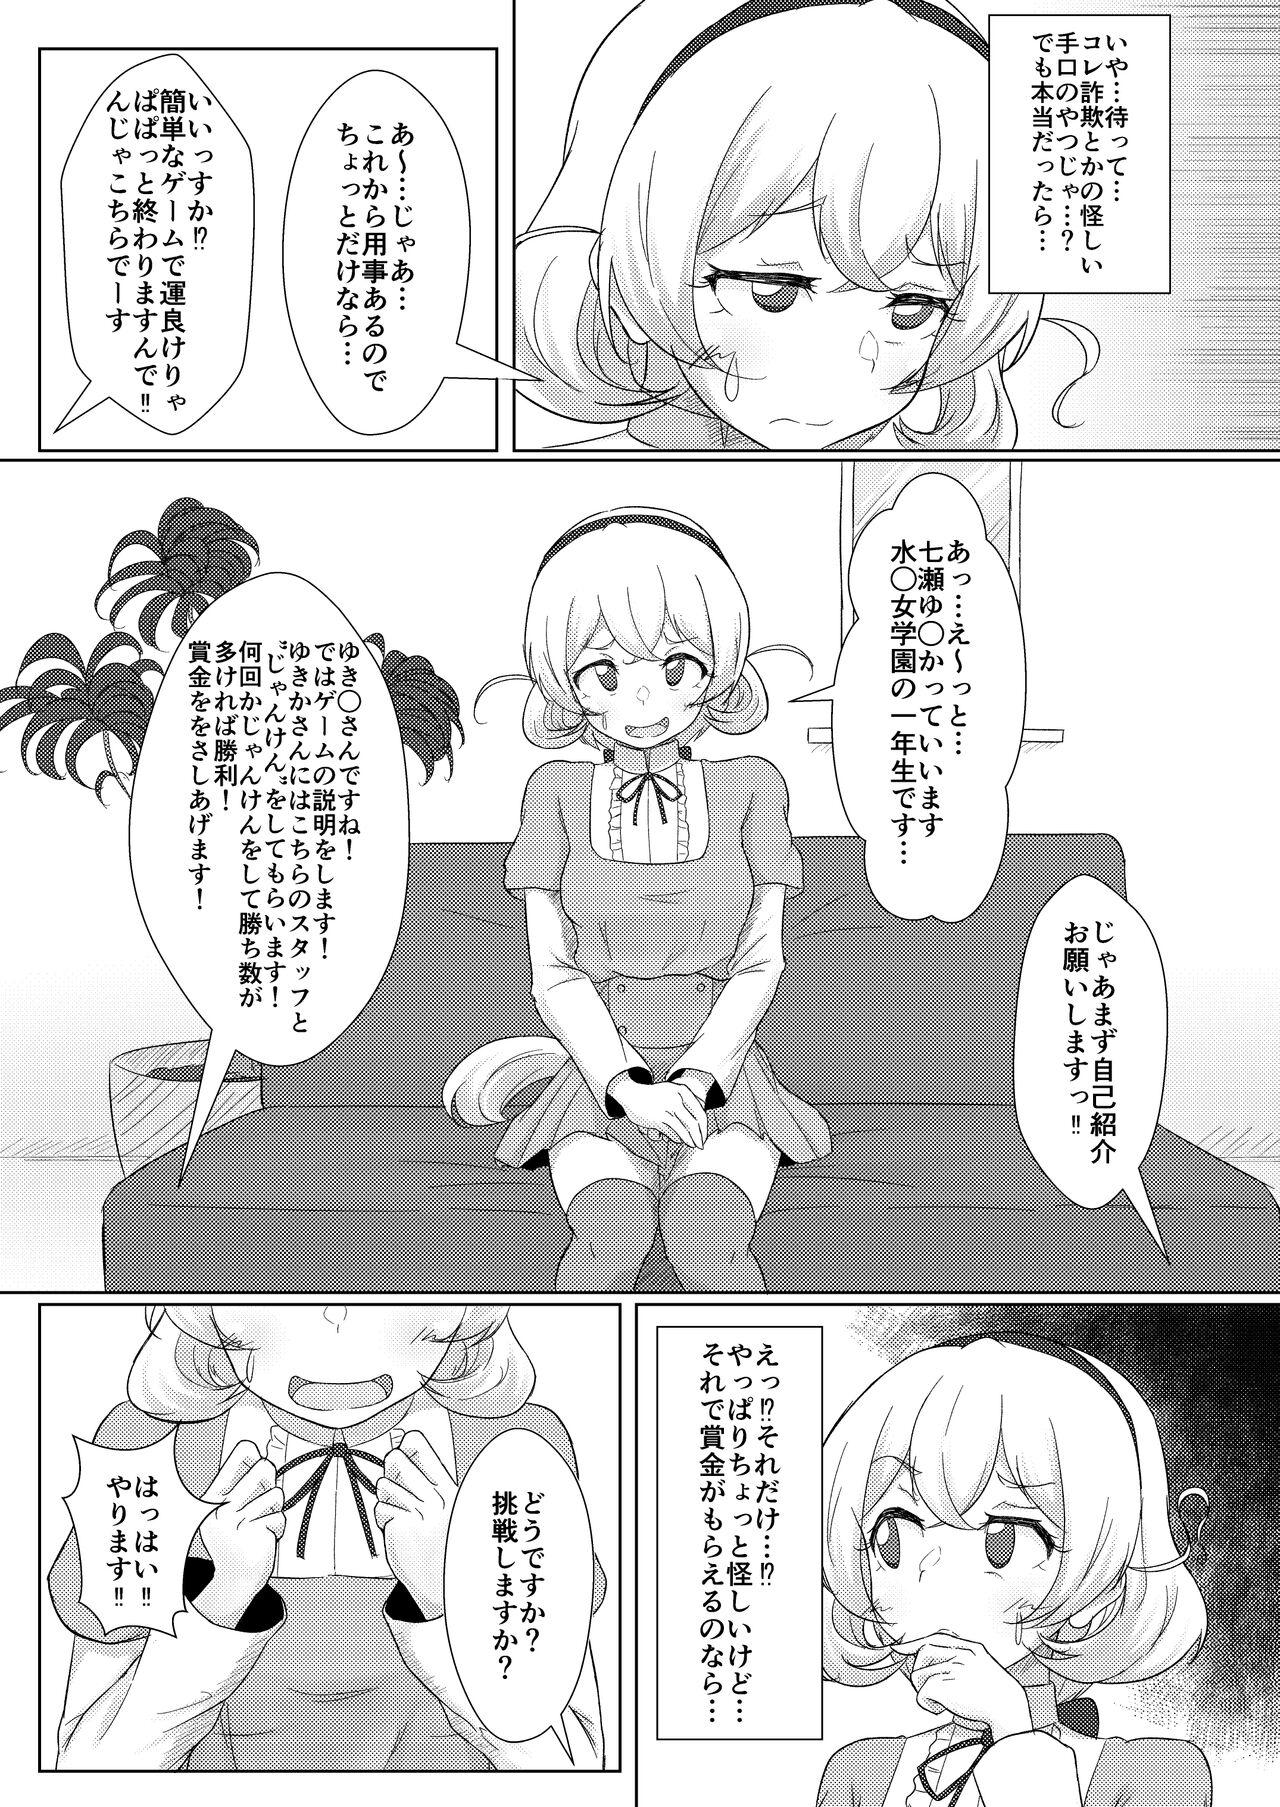 Amature Sex 素人ナンパ!!水名女○園生とガチンコ野球拳 - Puella magi madoka magica side story magia record Shoplifter - Page 4